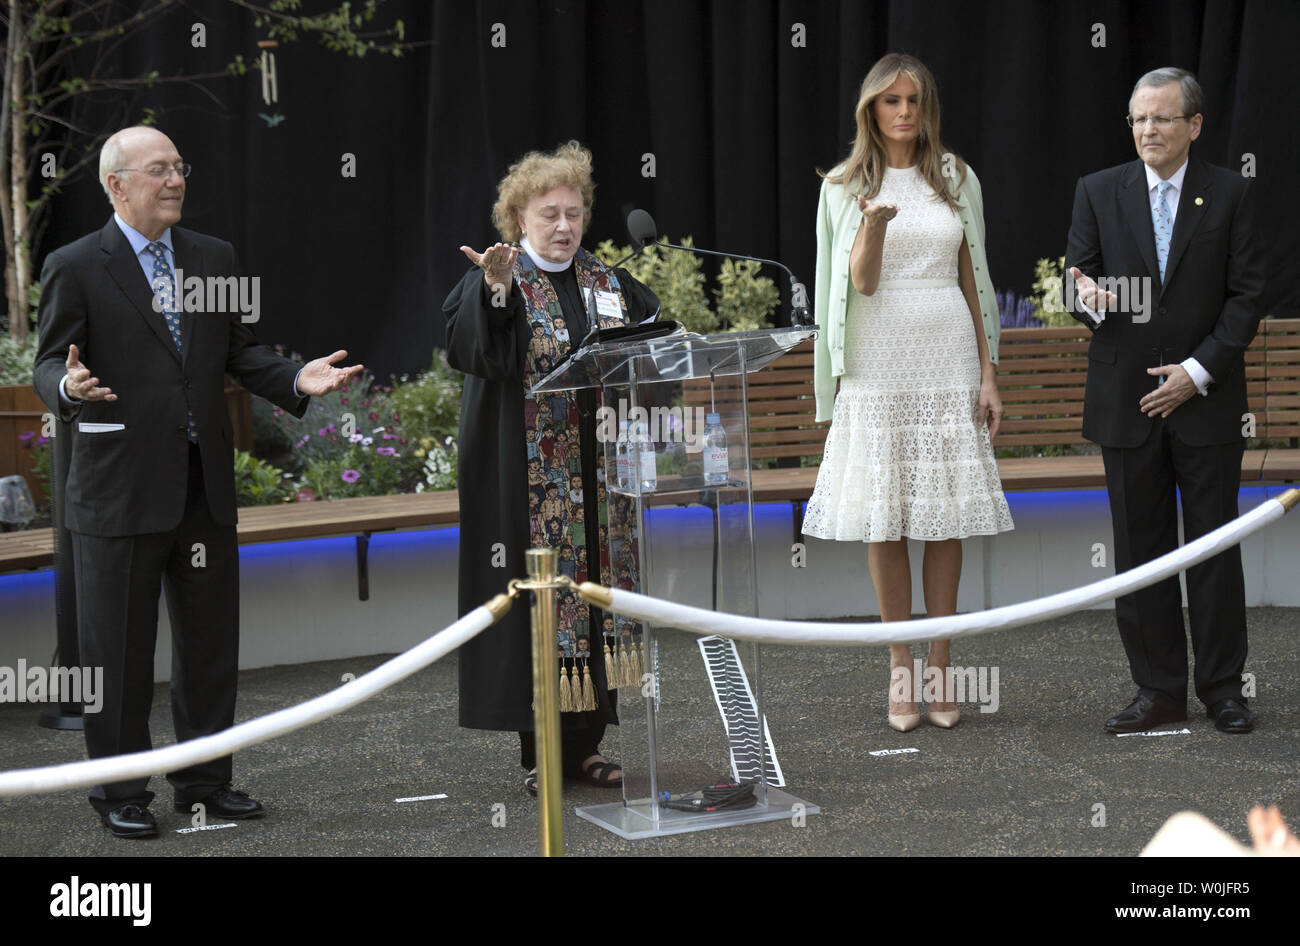 First Lady Melania Trump (2nd-R), Michael Williams (R), Chairman of the board, Kurt Newman, President and CEO, participate in a blessing by Reverend Kathleen Ennis-Durstine, at the opening ceremony of the Bunny Mellon Healing Garden, dedicated to the First Ladies of the United States, at Children's National Hospital in Washington, D.C. on April 28, 2017.  The hospital transformed a gravel rooftop into an outdoor garden for patients and their families. Photo by Kevin Dietsch/UPI Stock Photo